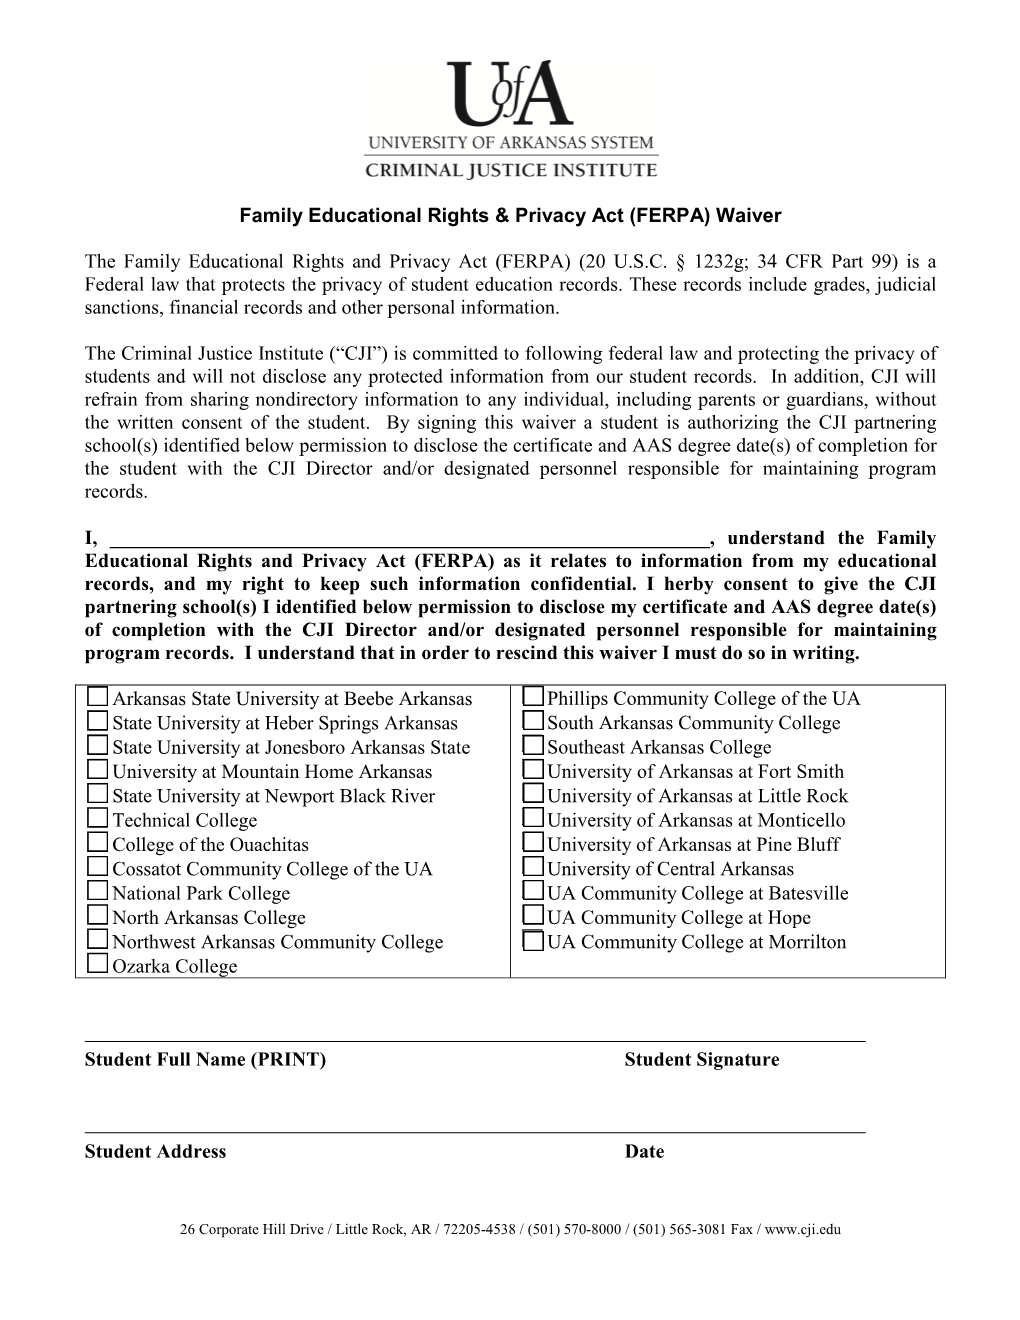 “Family Educational Rights Privacy Act (FERPA)” Form